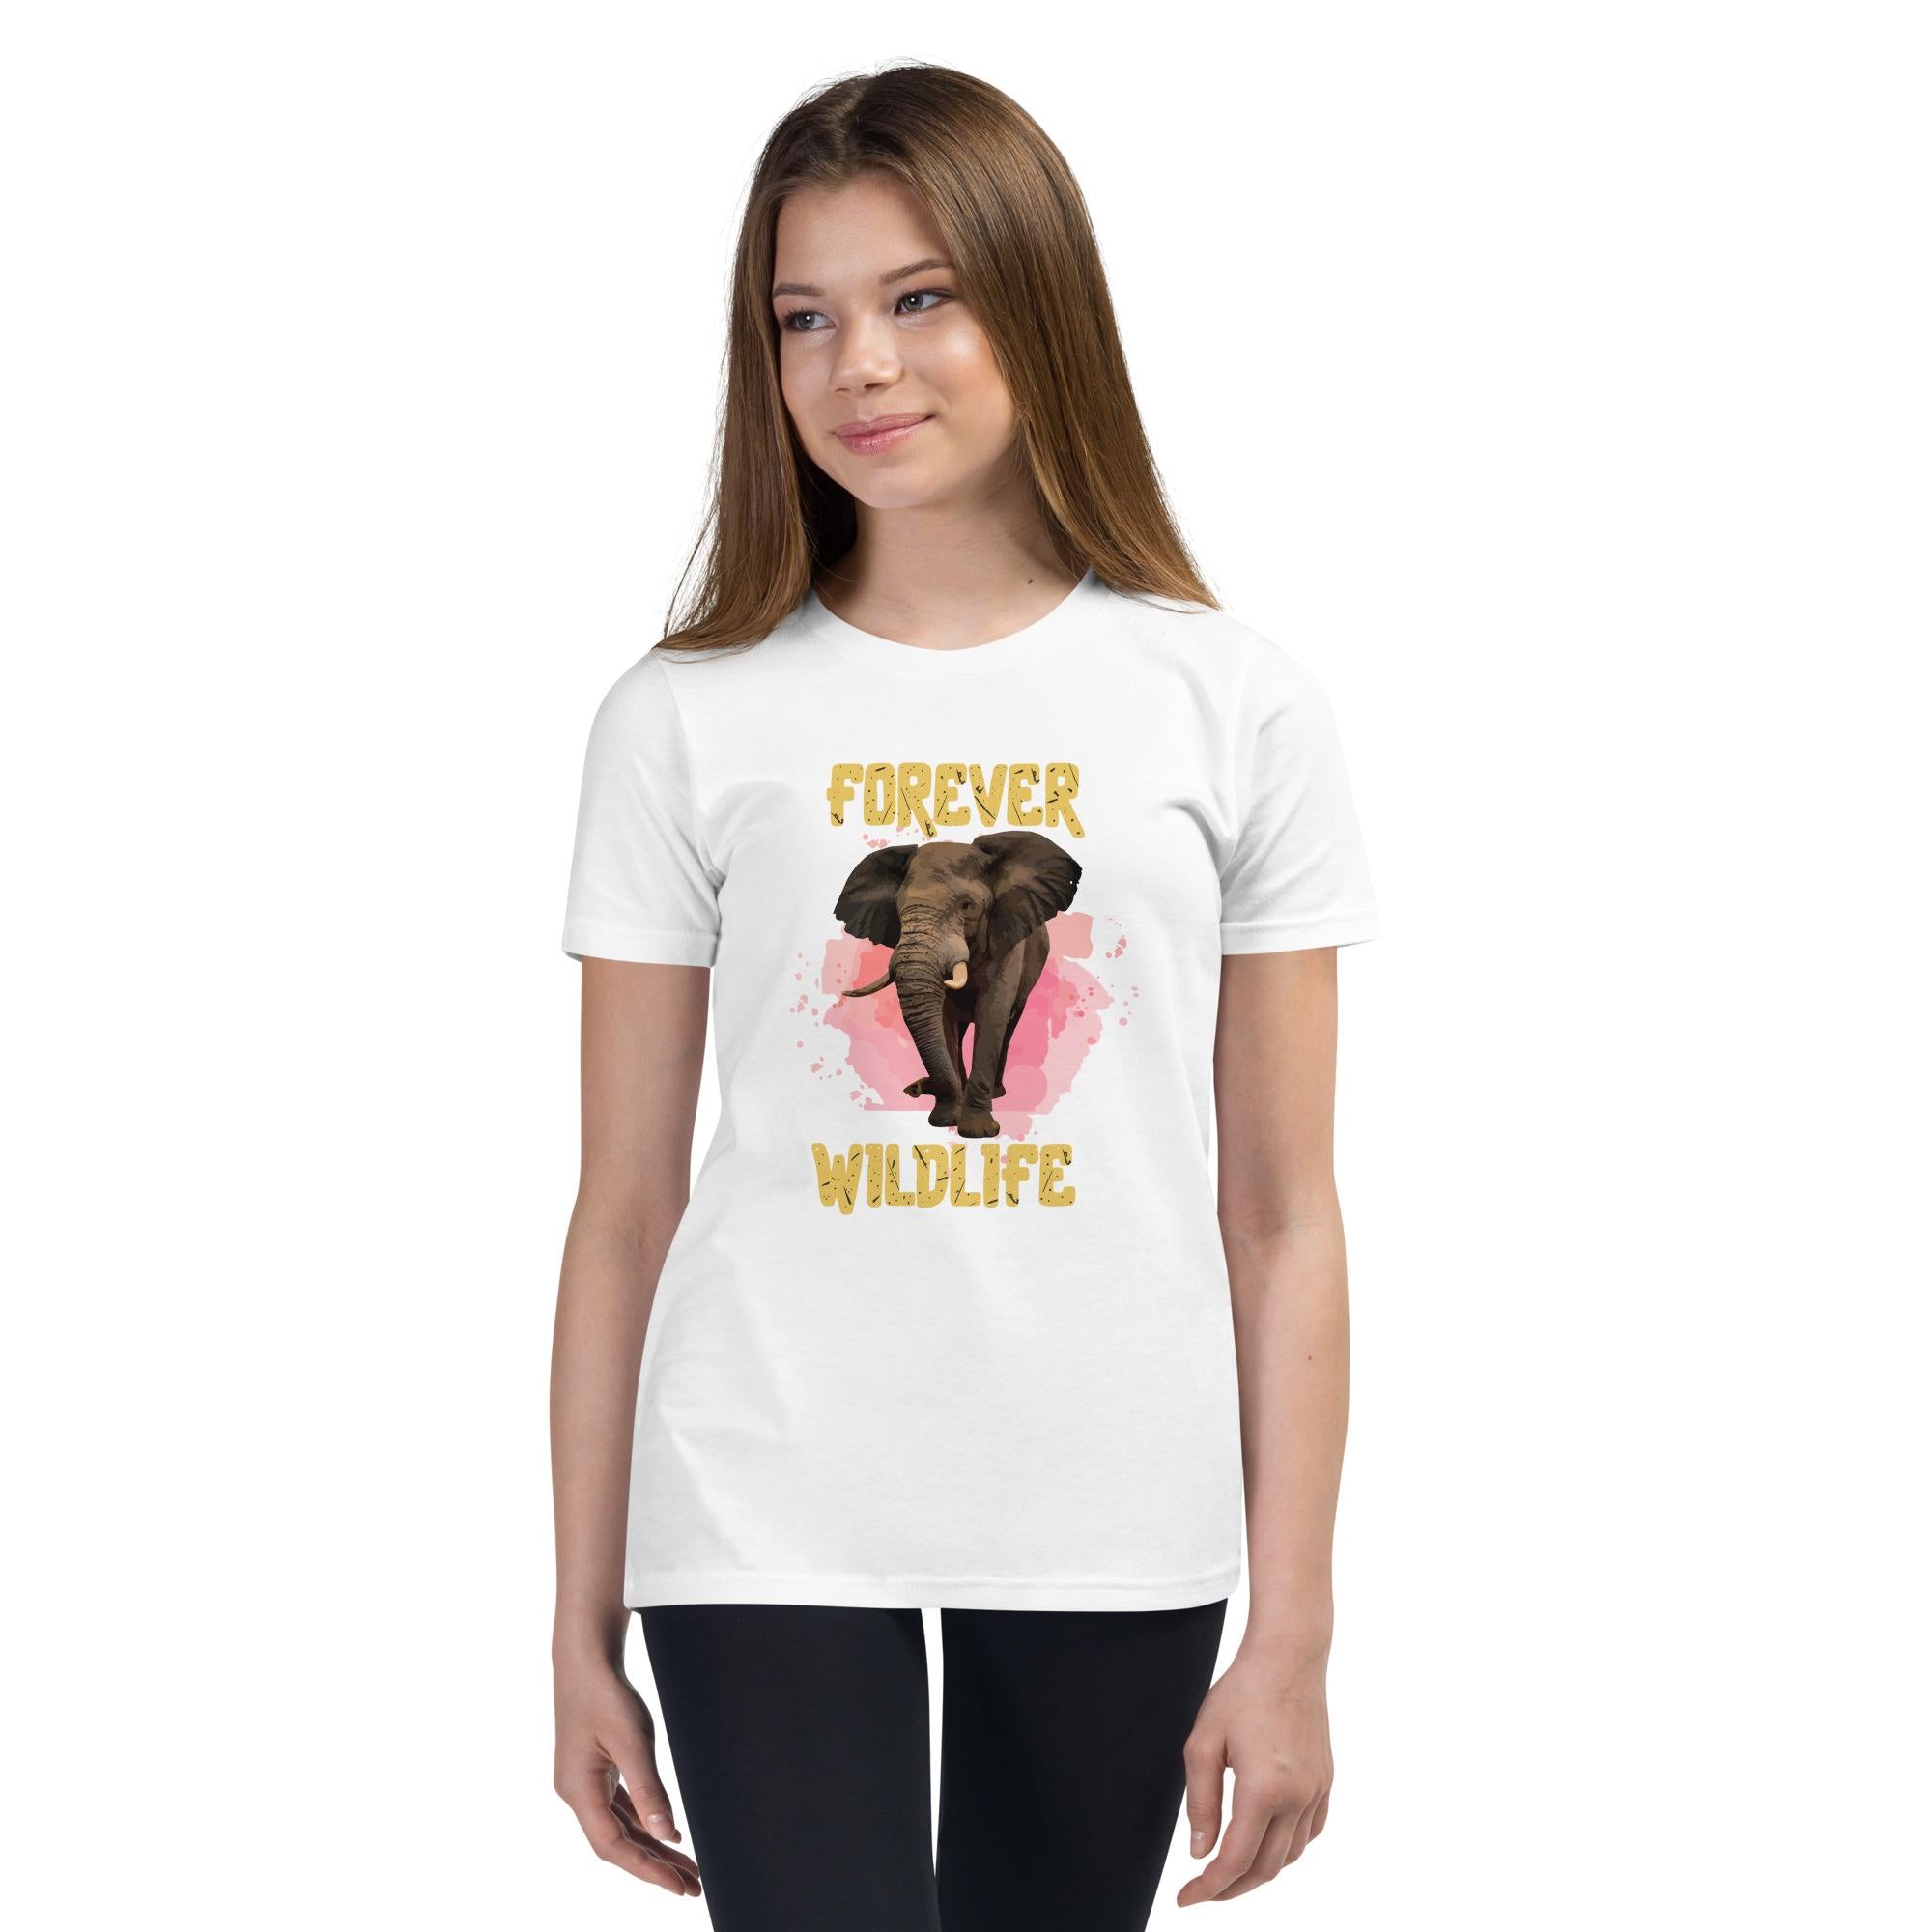 Teen wearing White Elephant Youth T-Shirt with Elephant graphic as part of Wildlife T Shirts, Wildlife Clothing & Apparel by Forever Wildlife